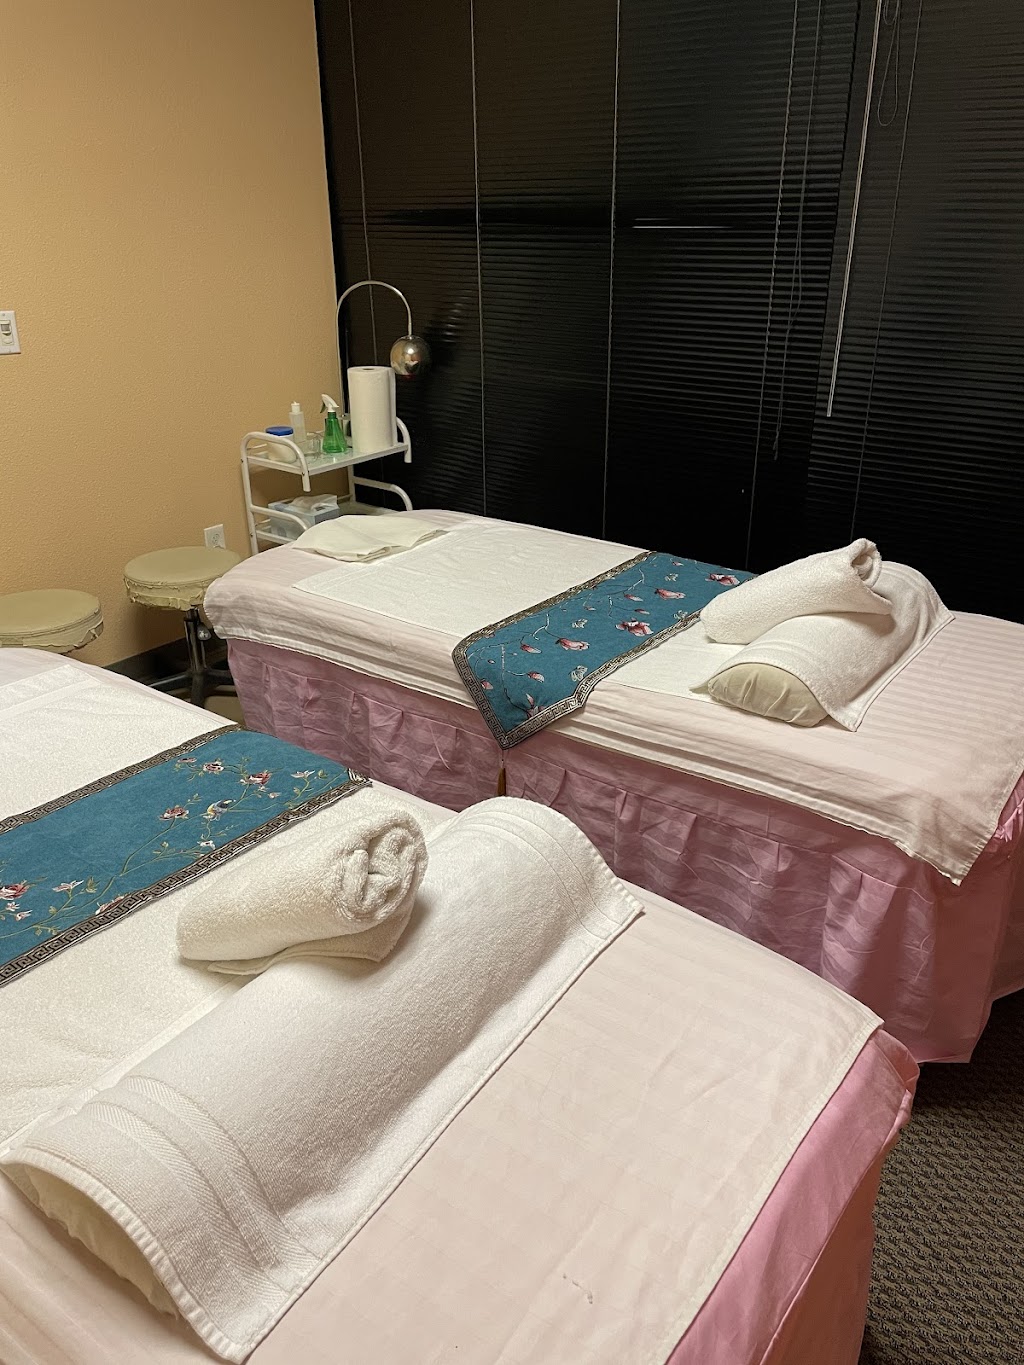 H2O Massage Therapy | 3284 W Grant Line Rd, Tracy, CA 95304, USA | Phone: (209) 832-2190